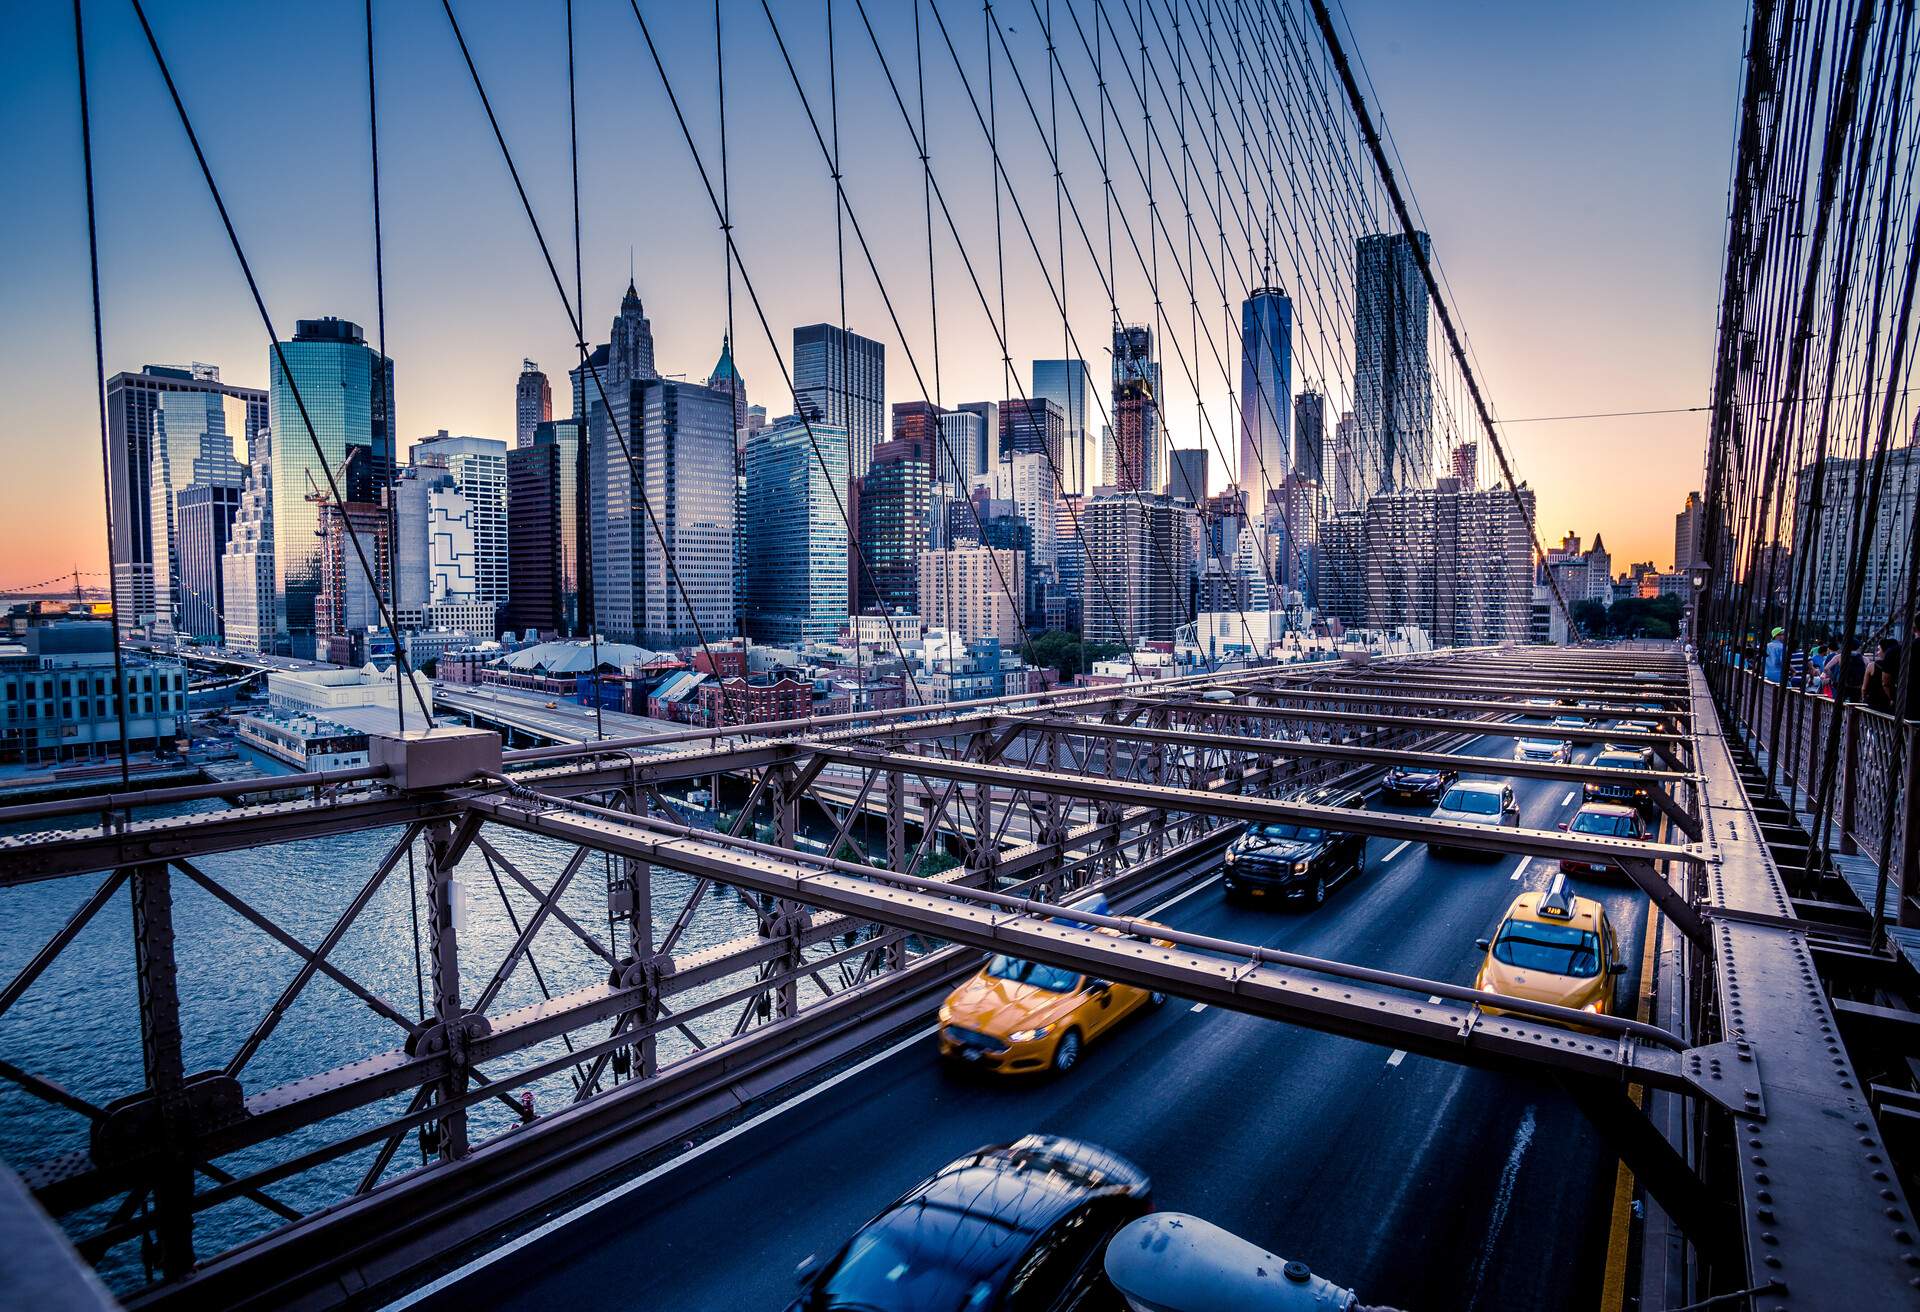 Cars speeding across the Brooklyn Bridge during a vibrant sunset, offering a captivating view of the iconic towering skyscrapers of Manhattan in New York City.